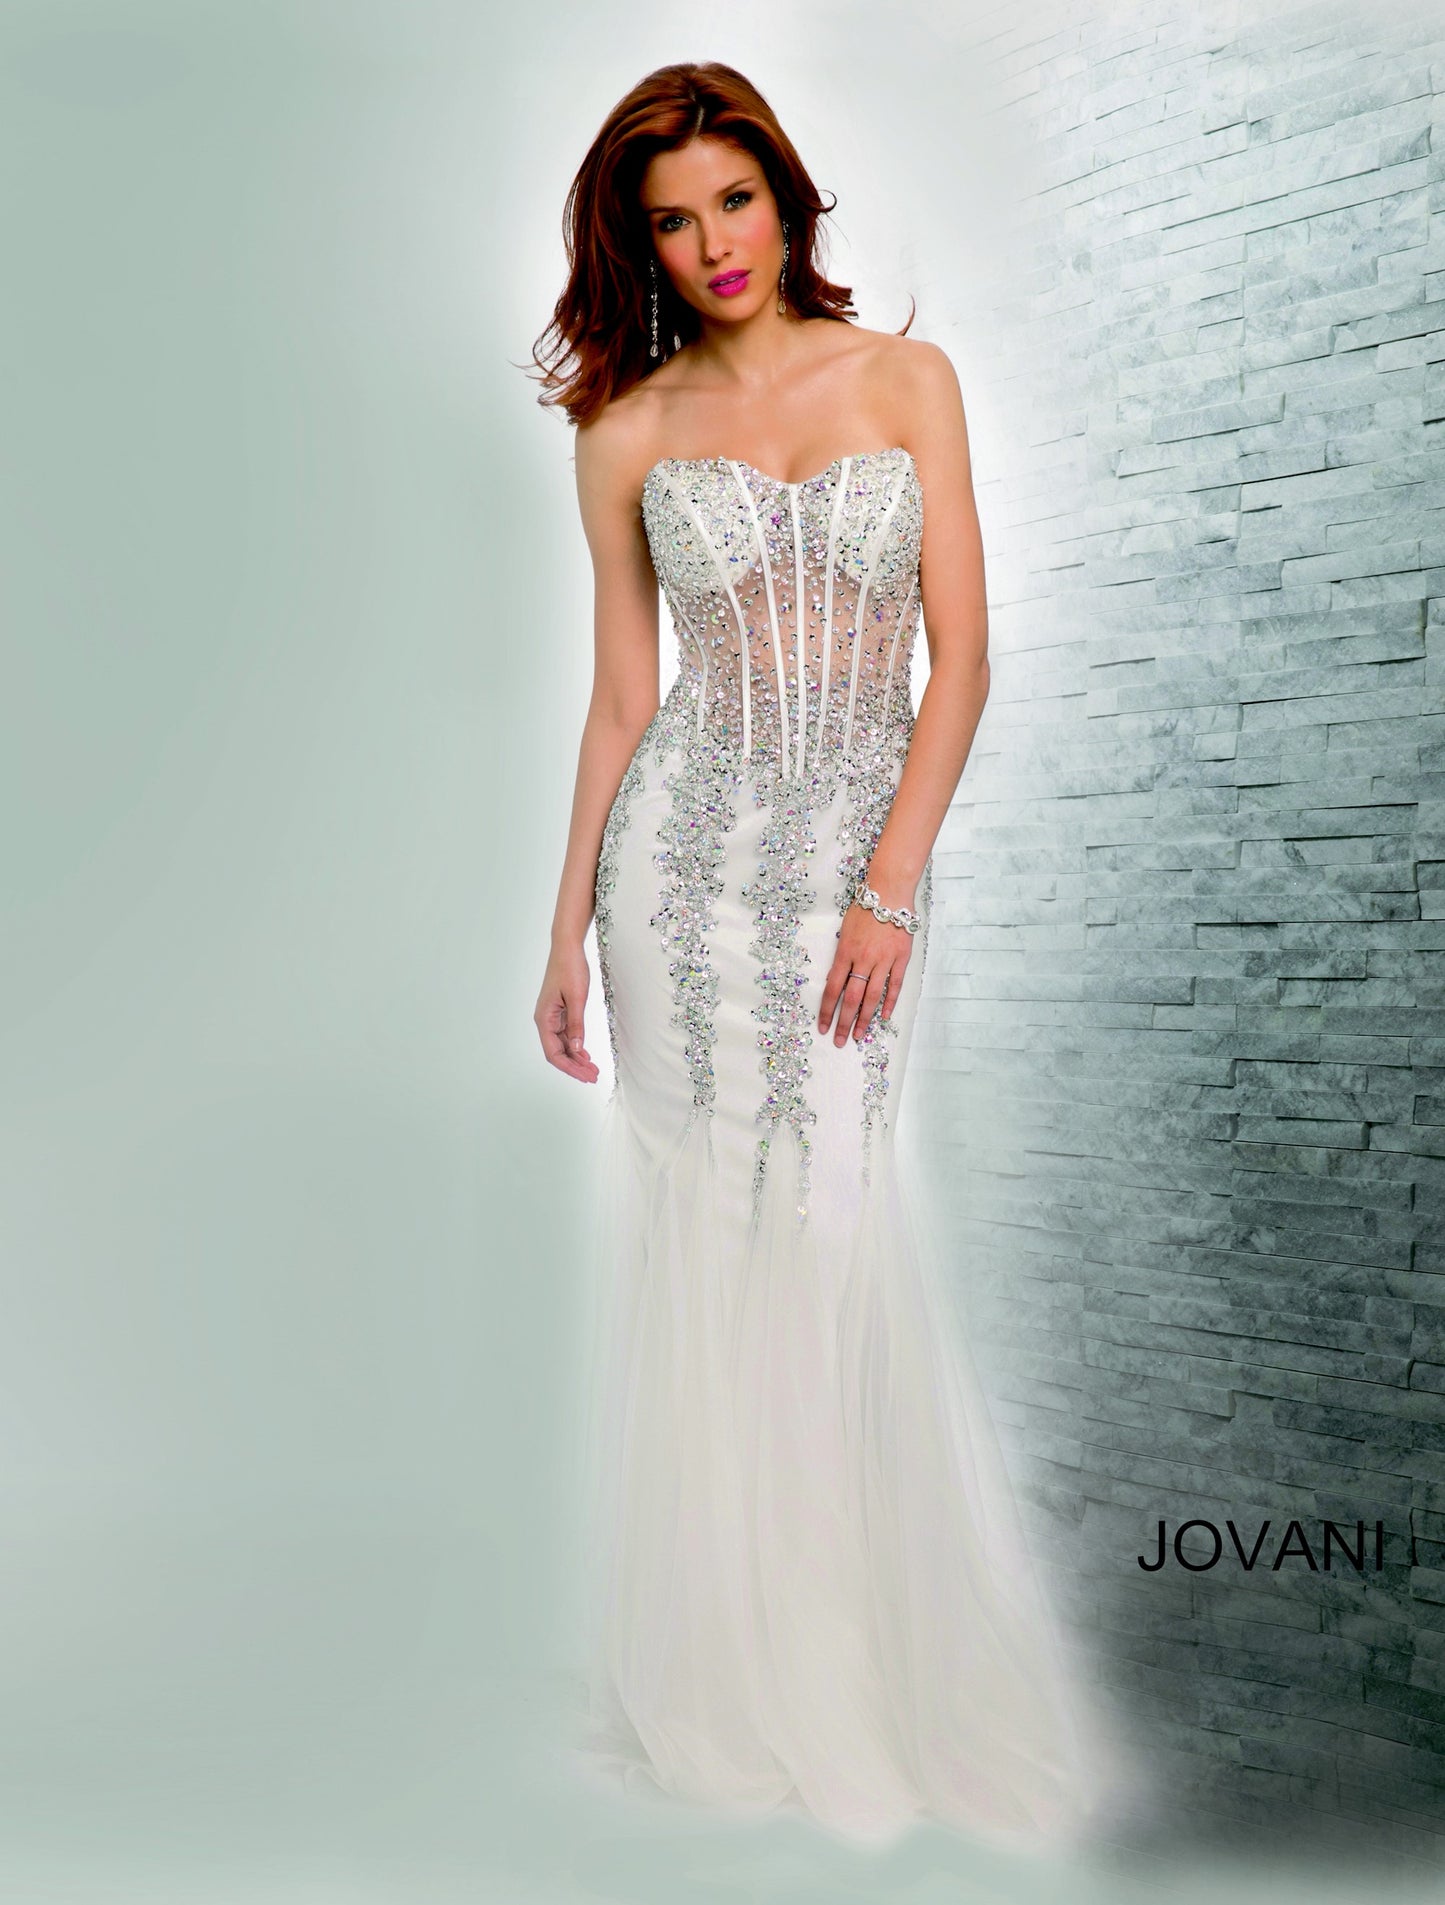 Jovani 5908 Sheer Corset Mermaid Prom Dress Pageant Sexy Embellished Formal Gown